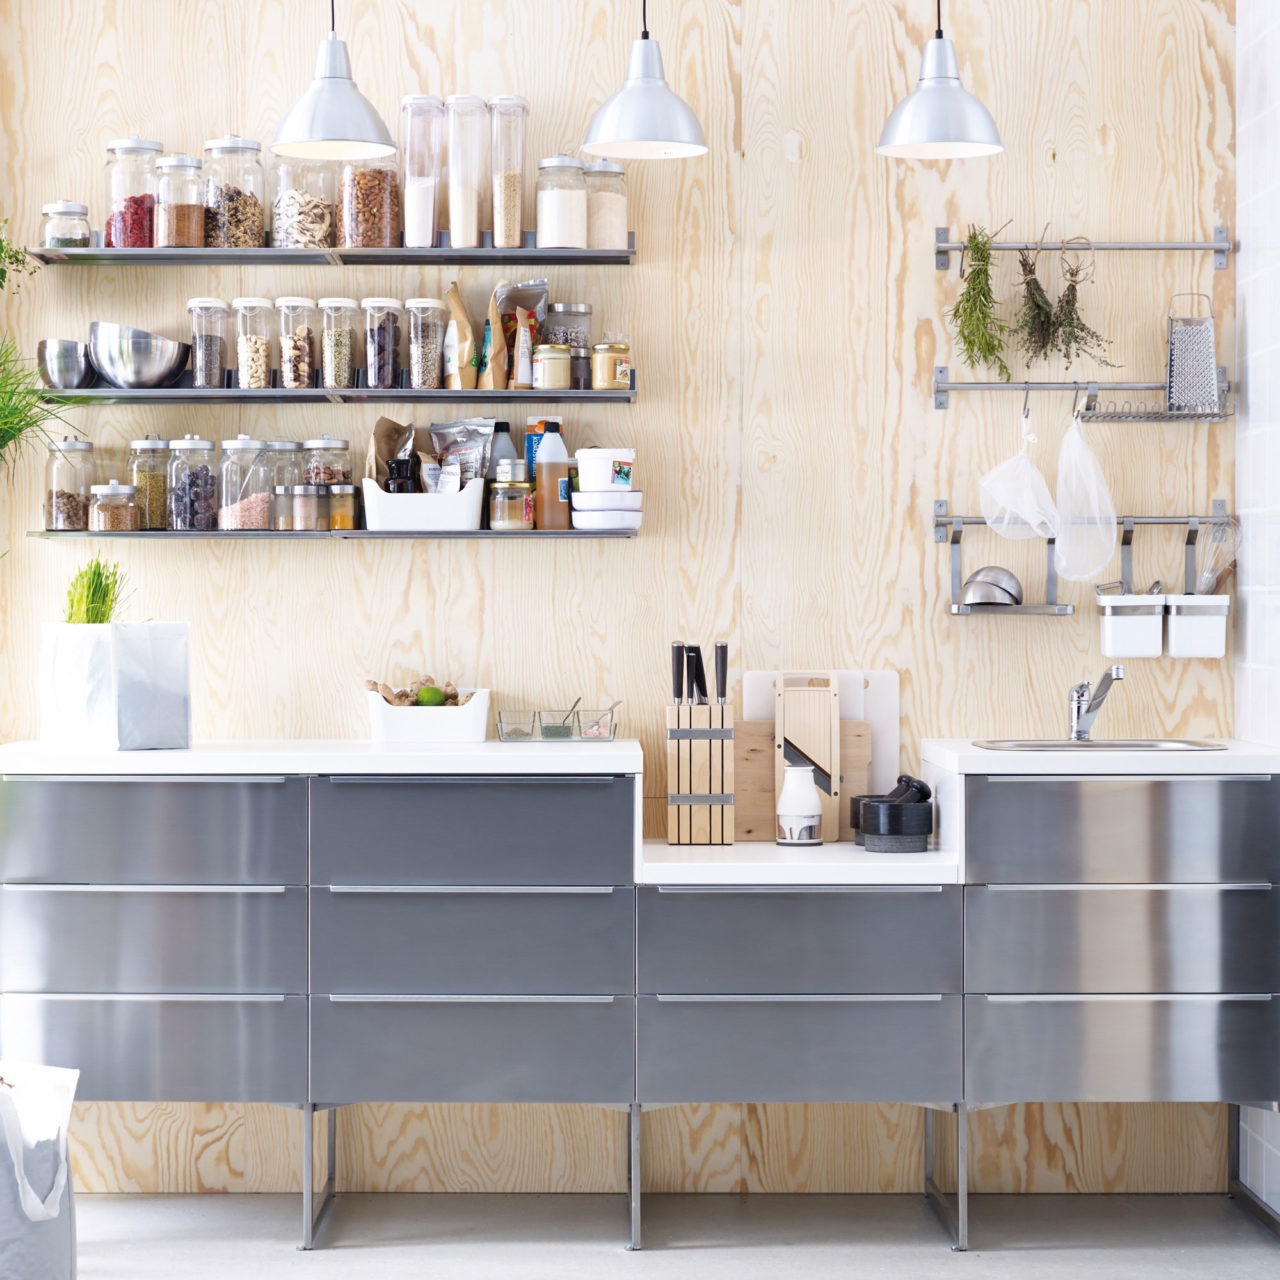 A modular kitchen with drawer fronts in brushed metal against a wall of untreated plywood. Dry goods in rows on narrow wall shelves.